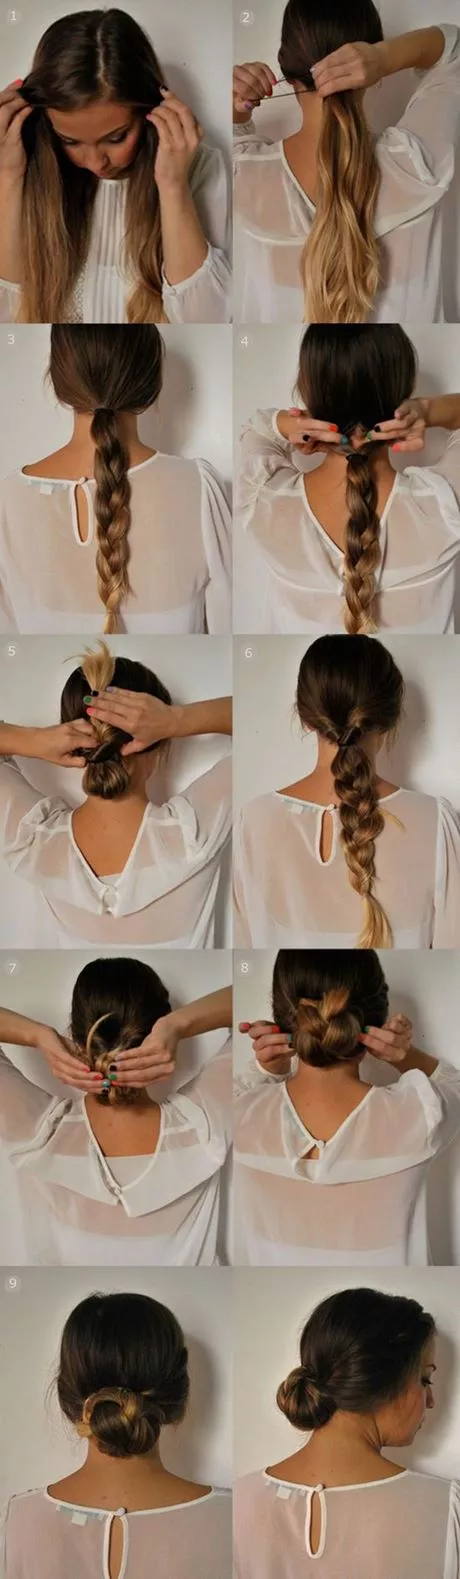 Cute hairstyles easy and fast